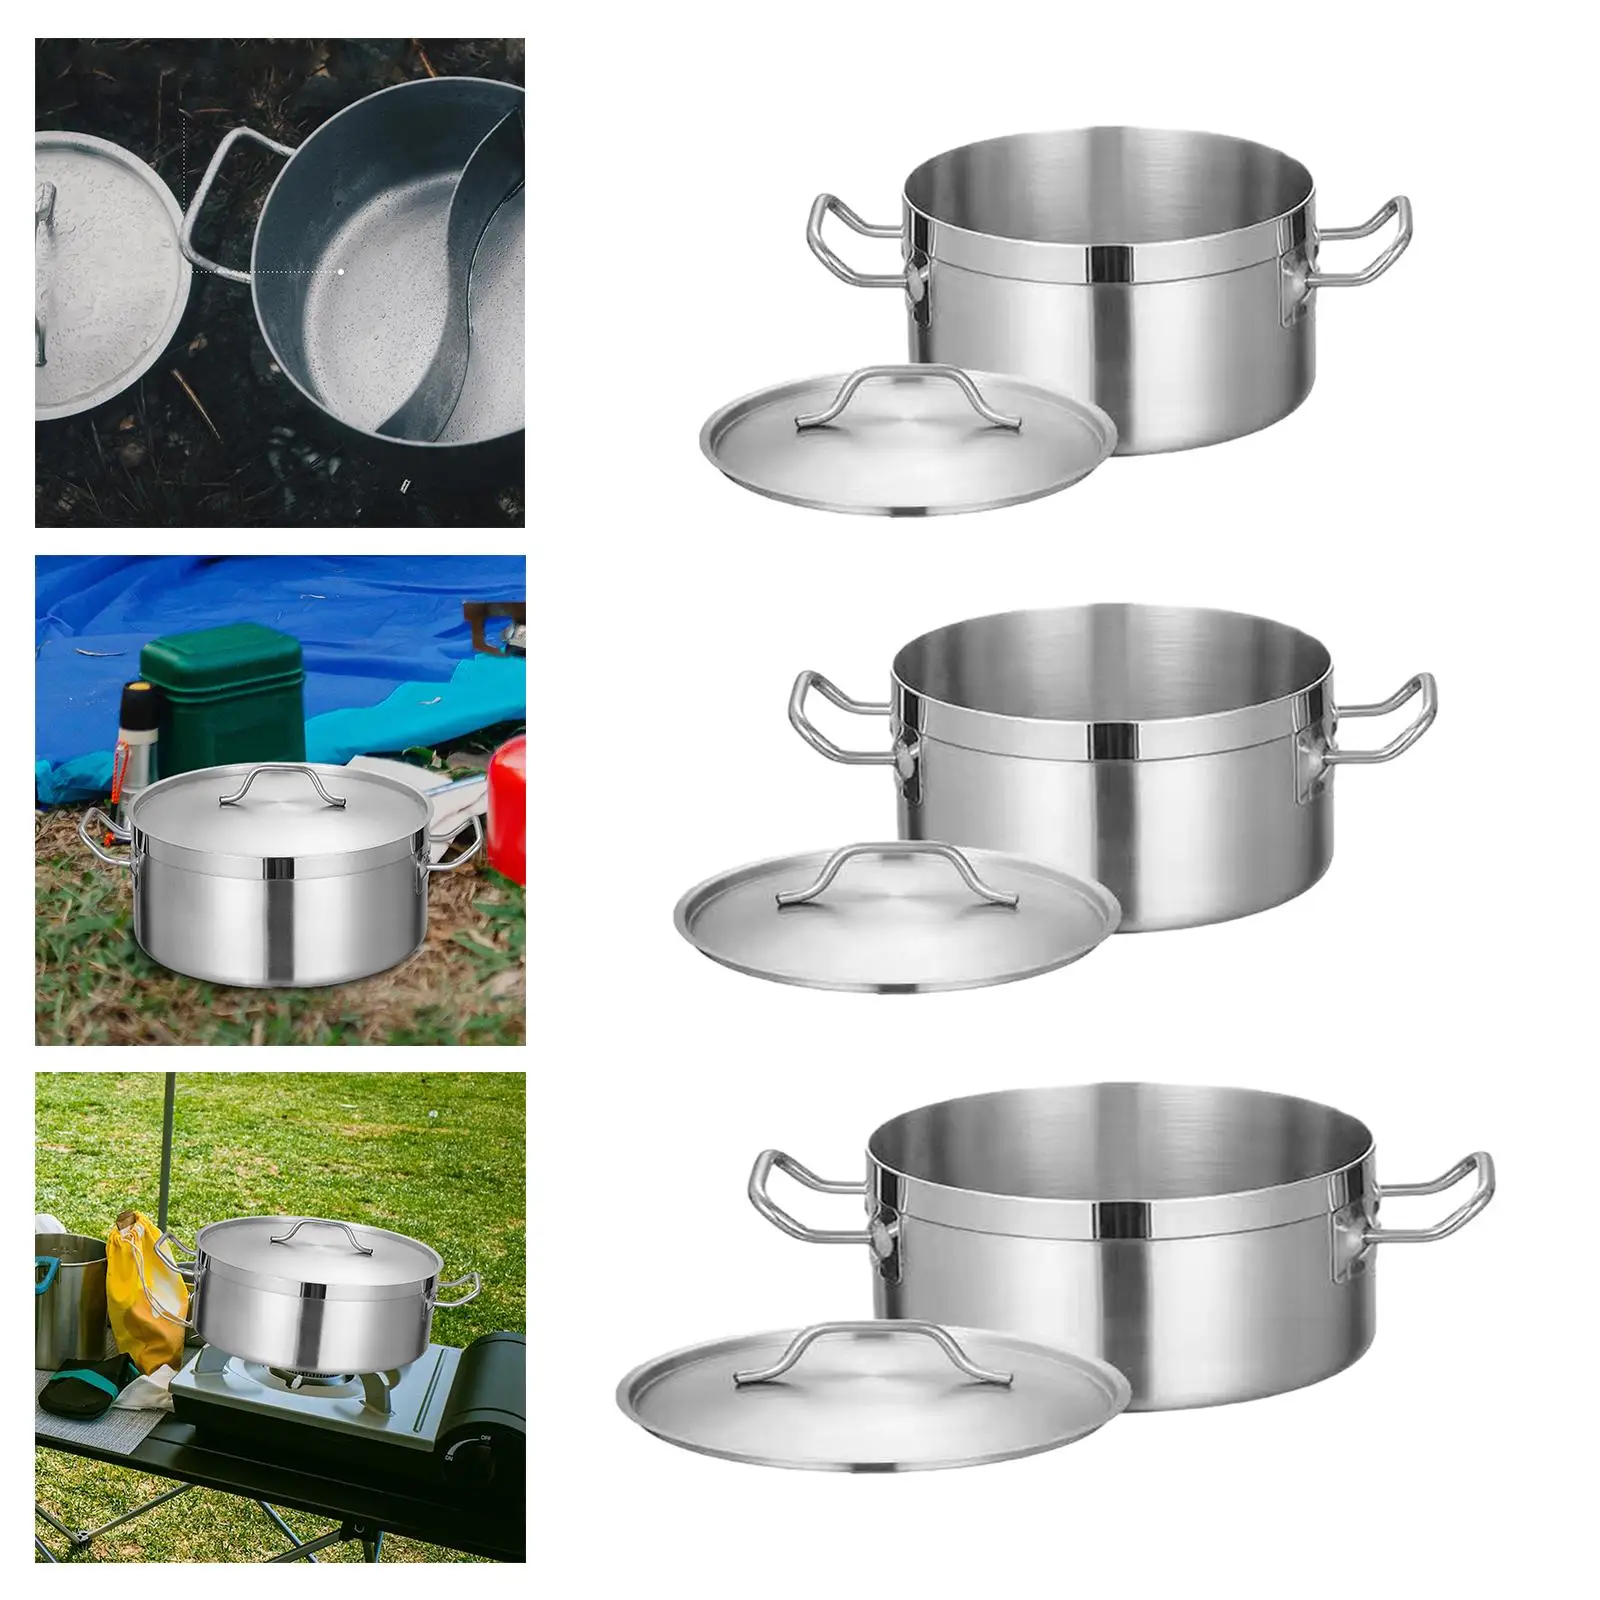 Stainless Steel Stockpot Saucepan Multipurpose Double Handles Small Soup Pot for Kitchen Outdoor Camping Household Commercial